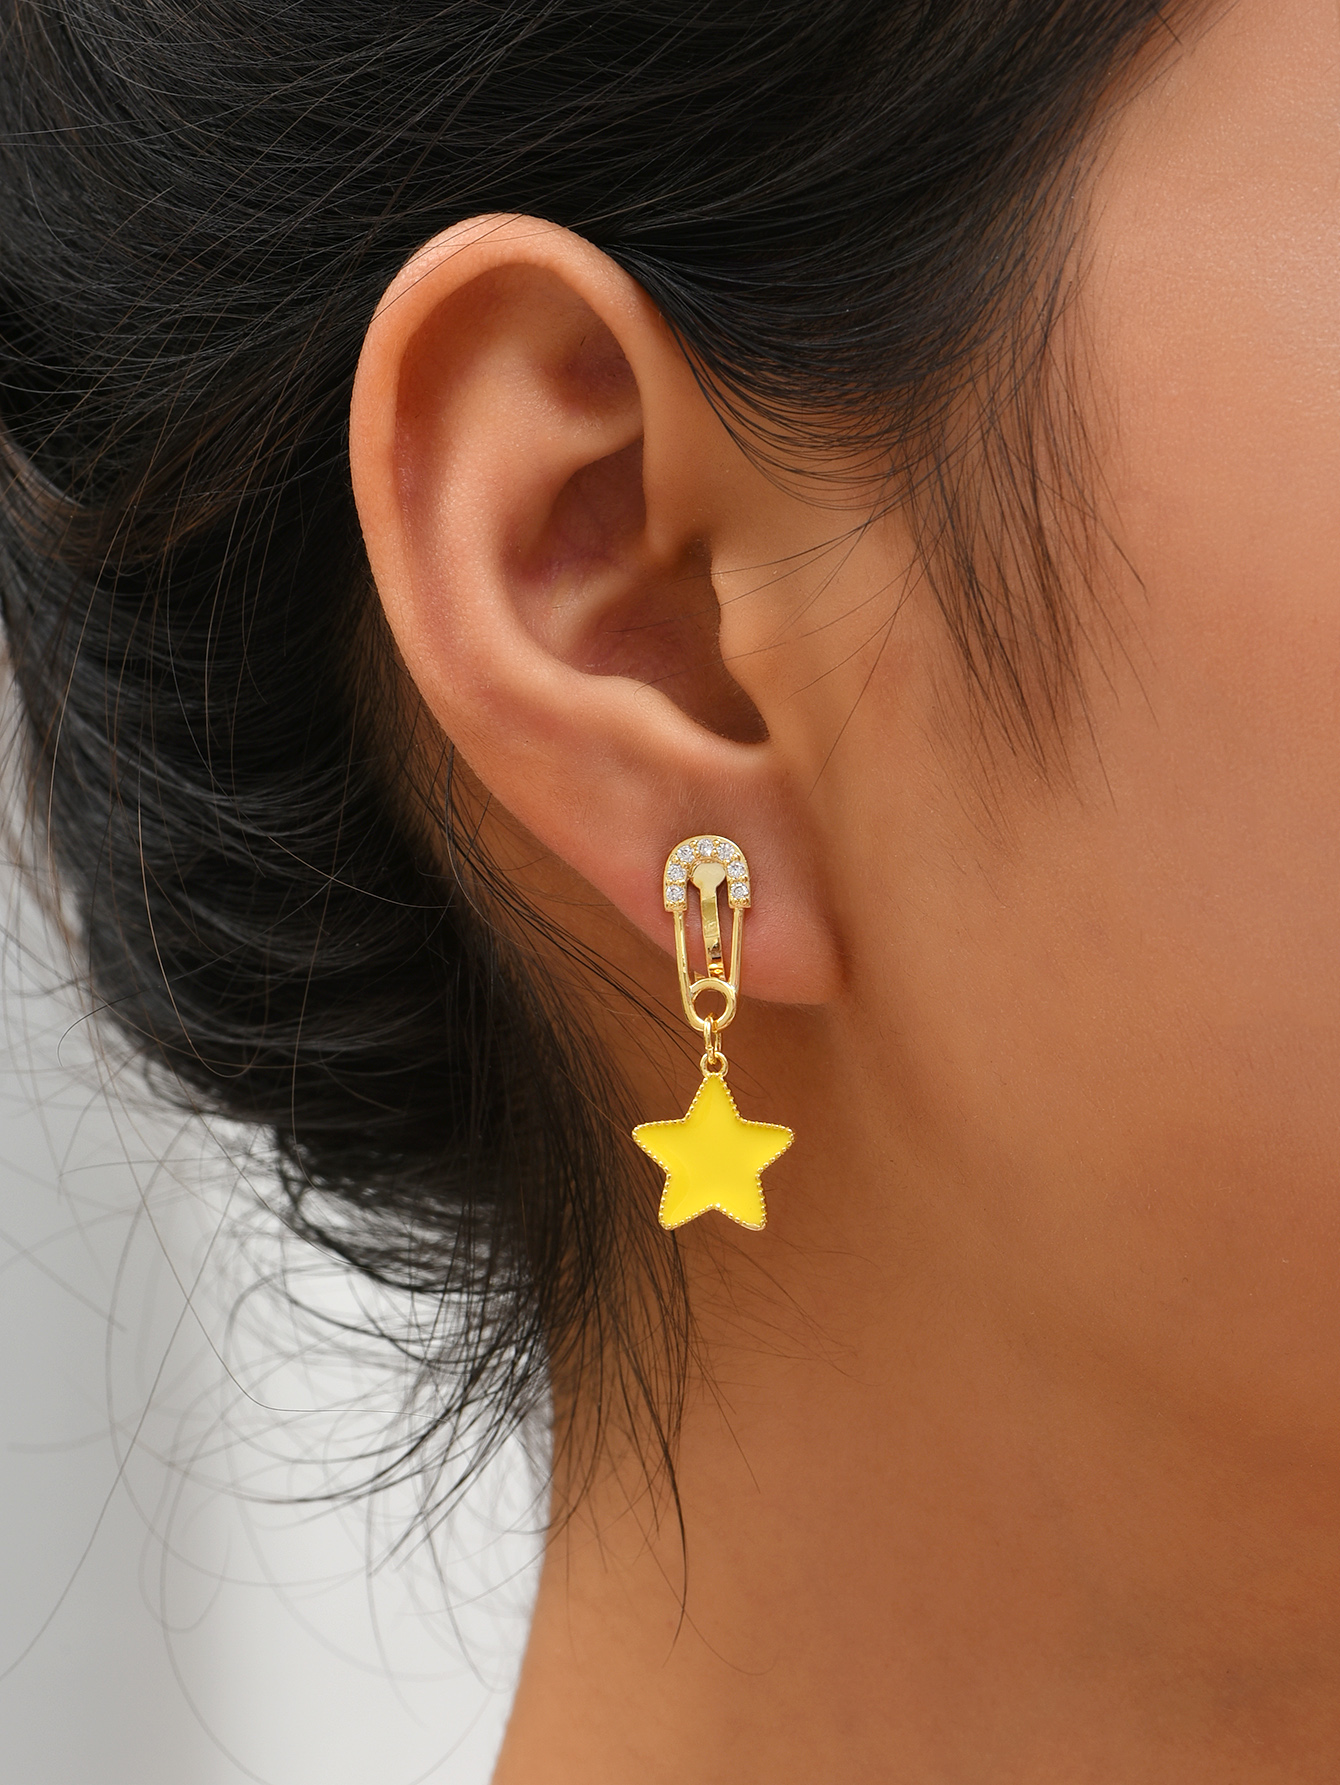 10pc Star Dangle Mismatched Earrings in Golden Tone with Zirconia I GCJ503_Yellow